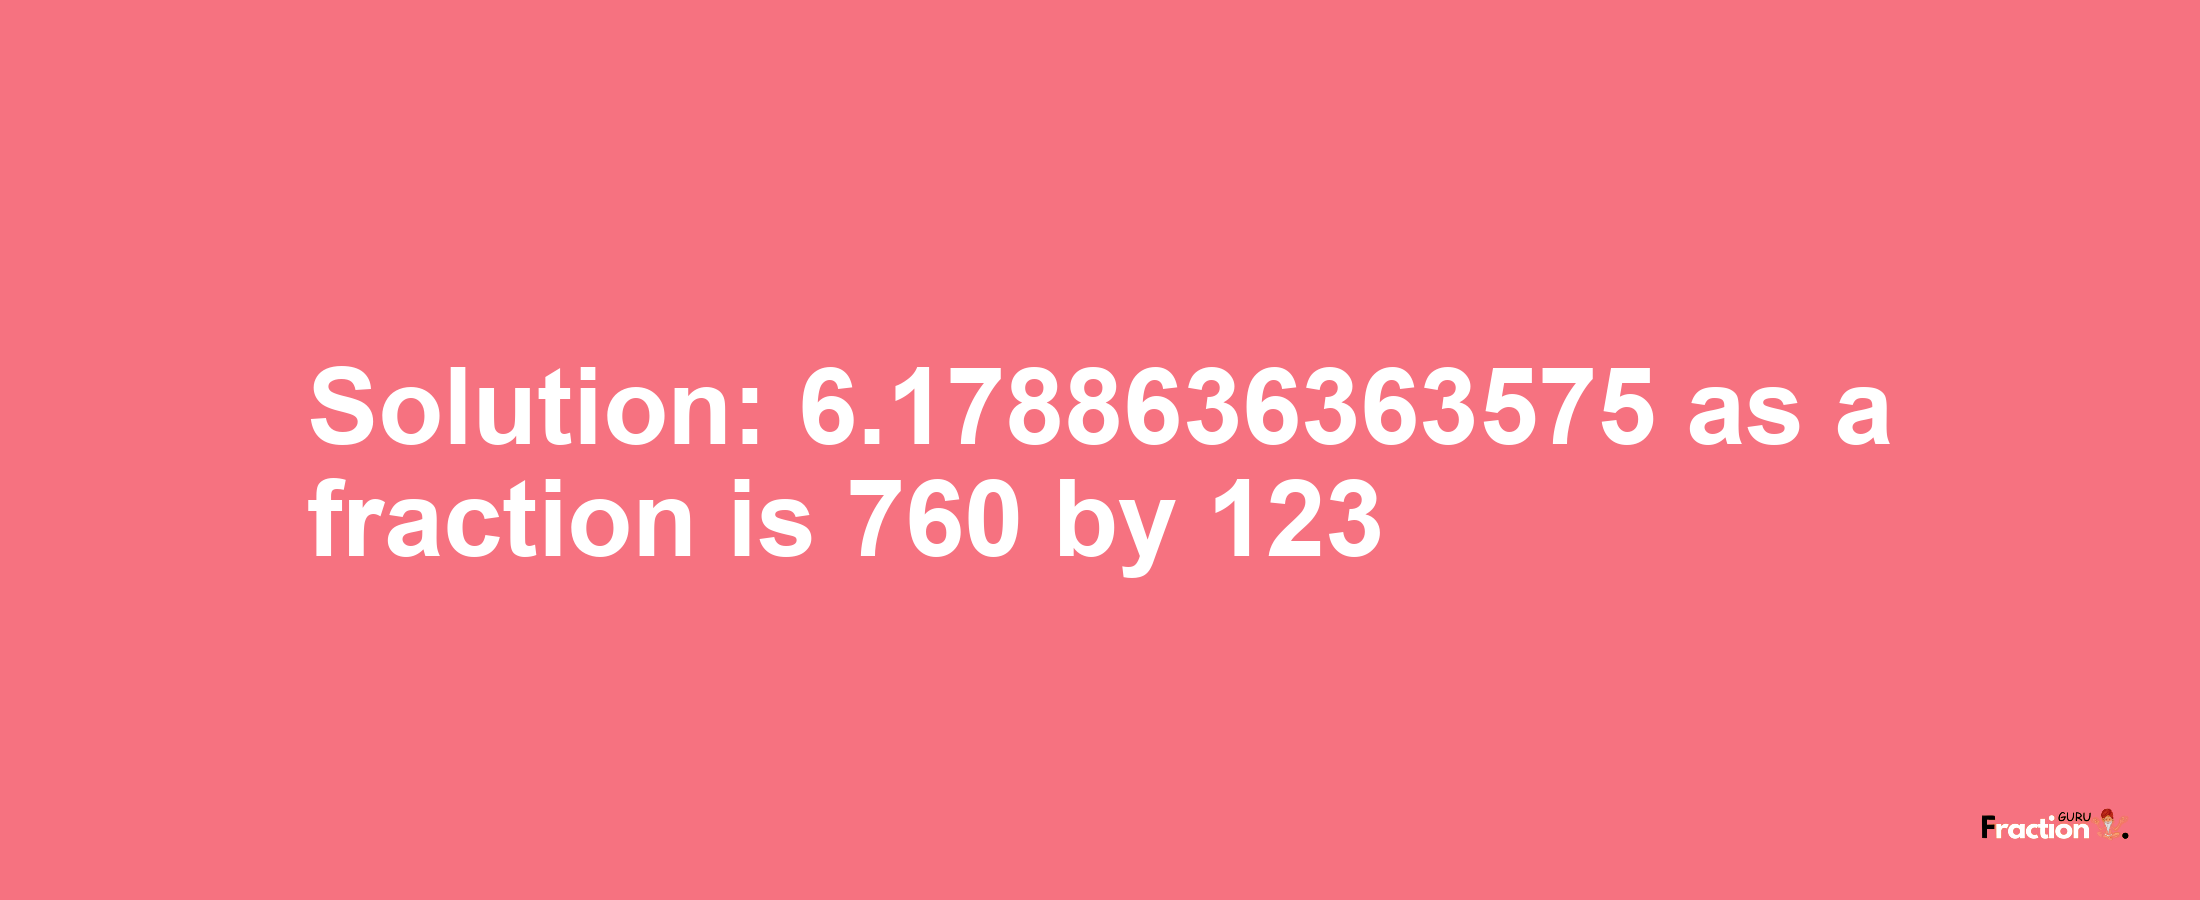 Solution:6.1788636363575 as a fraction is 760/123